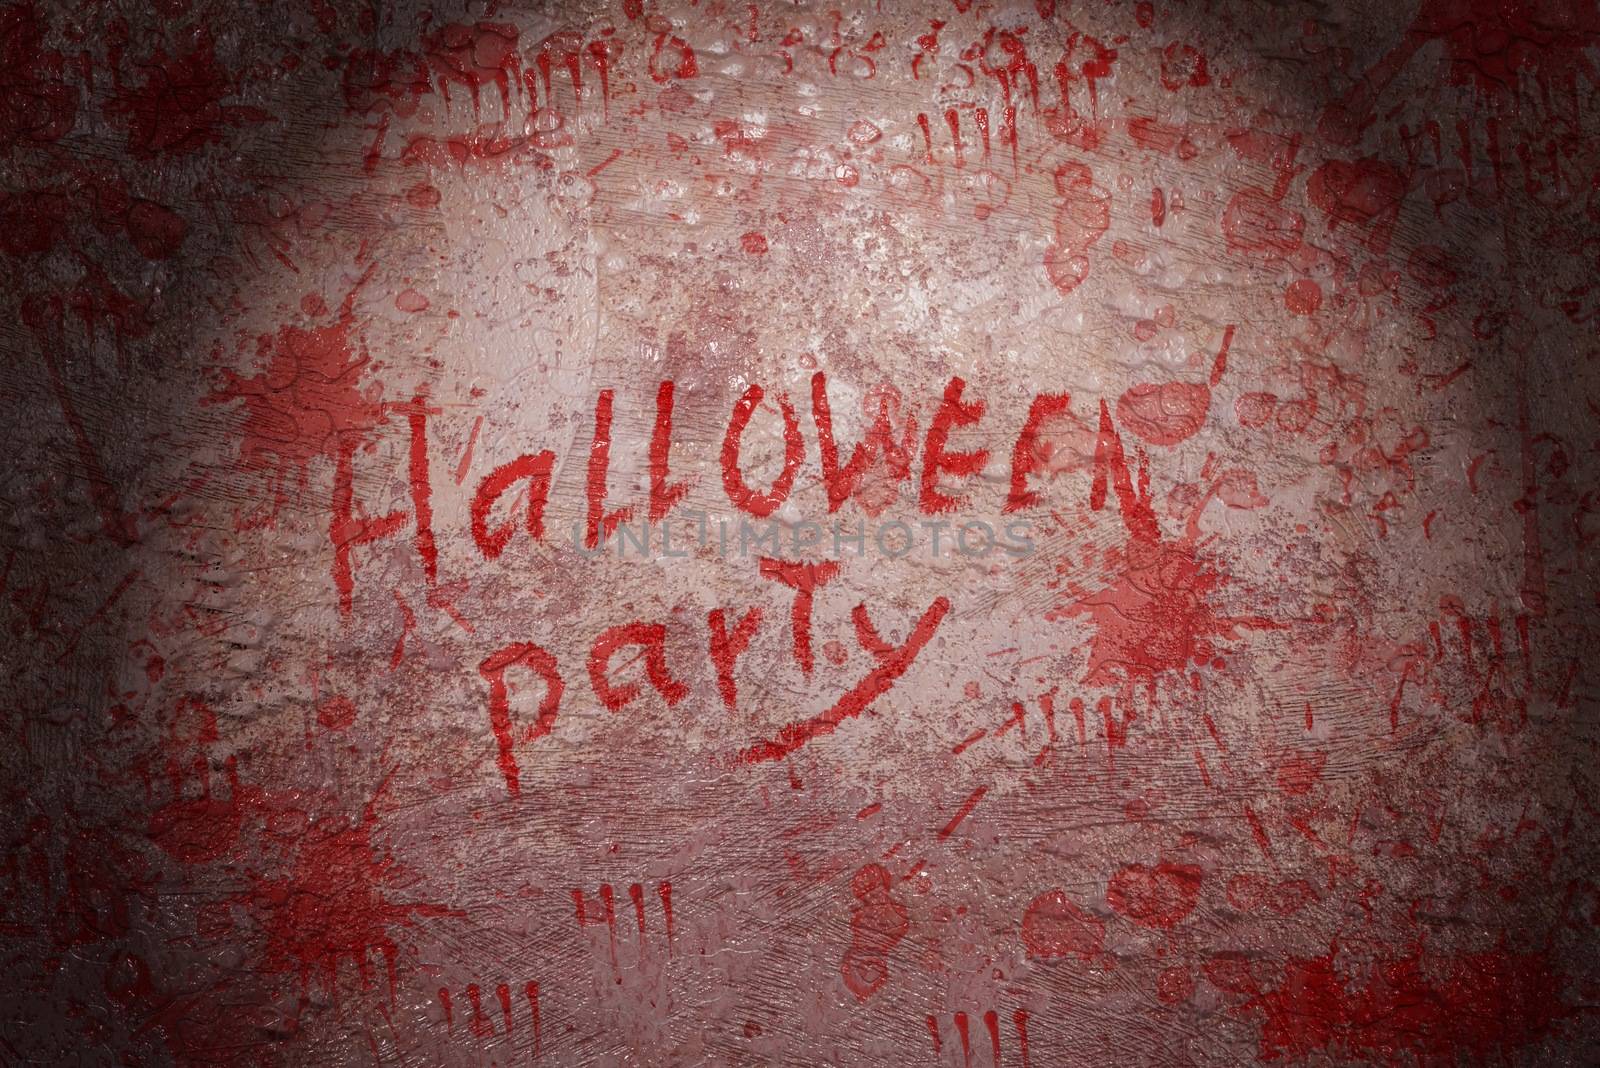 Blood on wall, halloween party background